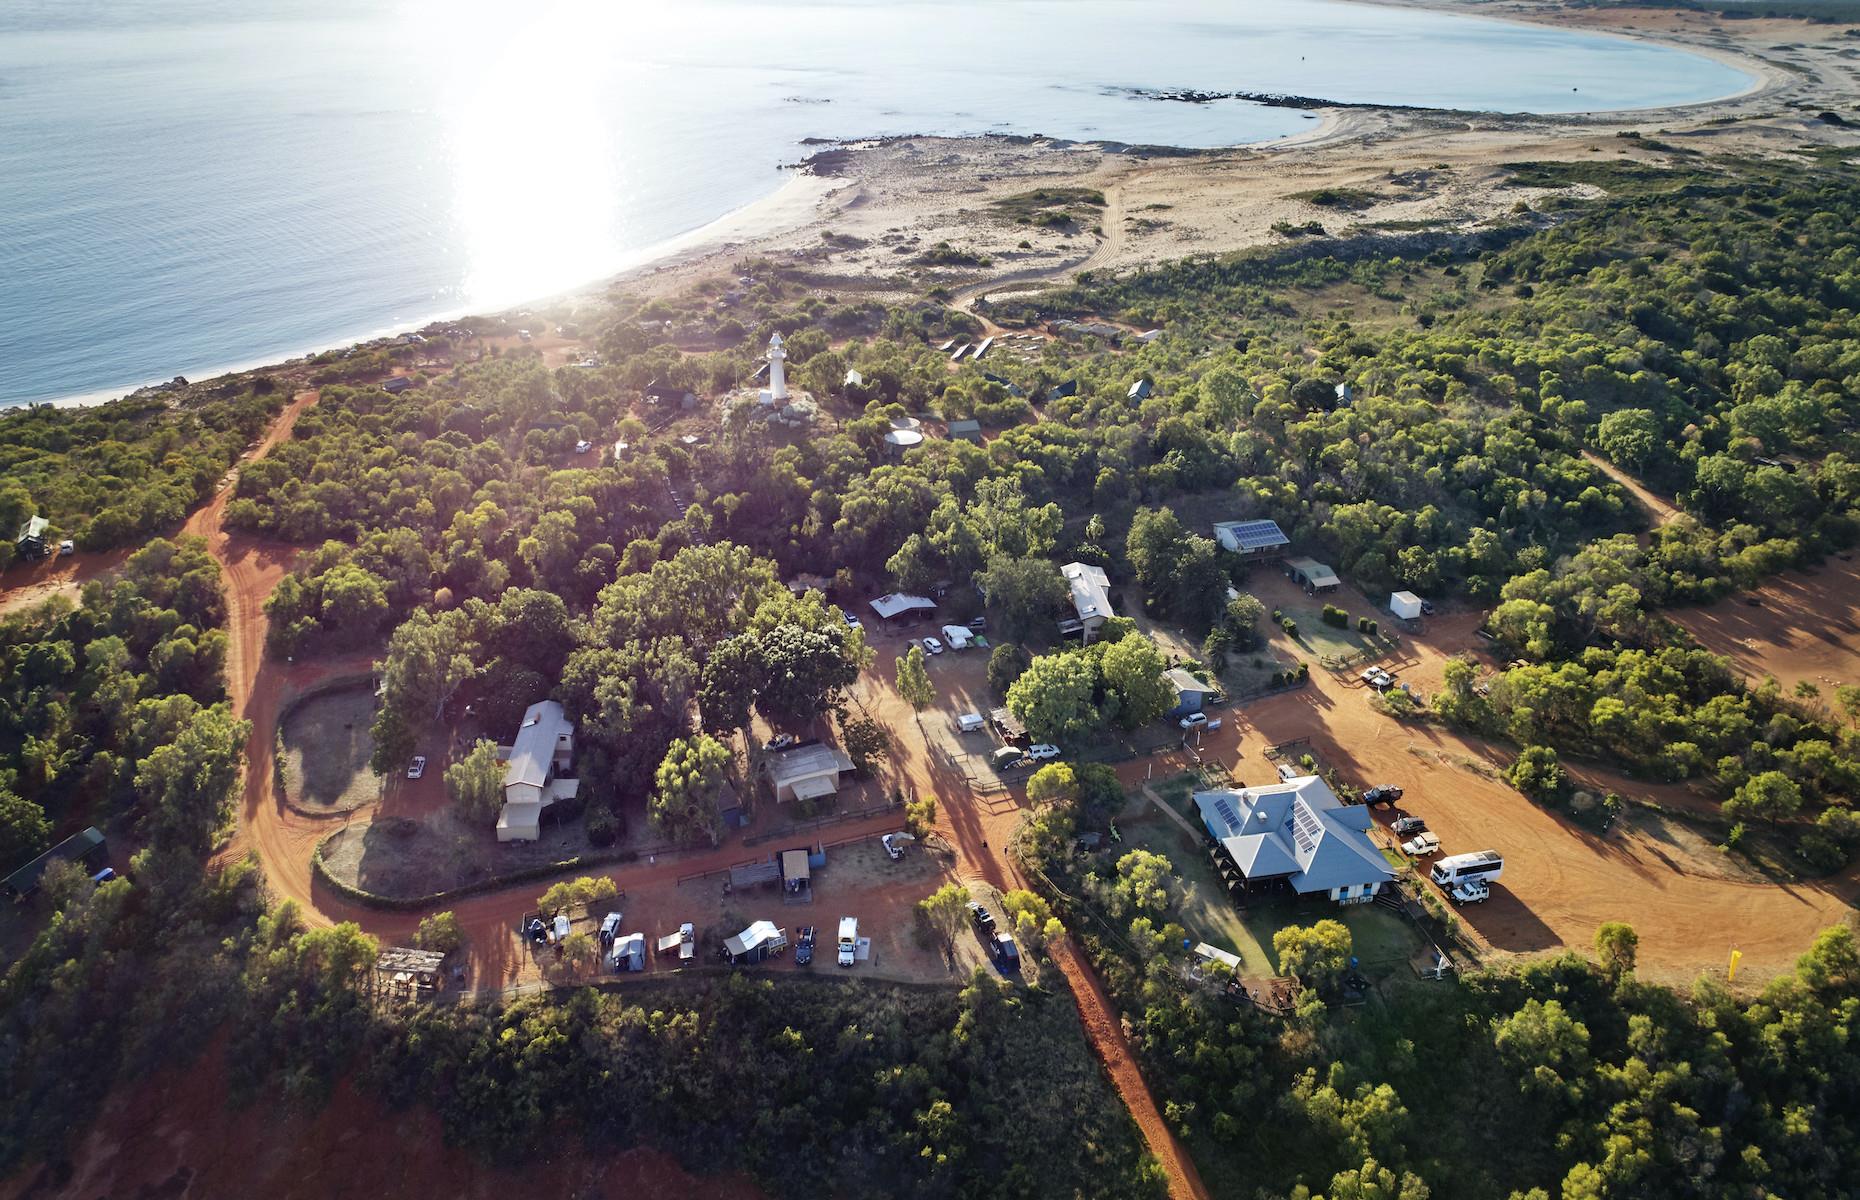 <p>A spectacular wilderness setting is the USP of <a href="https://www.kooljaman.com.au/about-us/play">this truly remote off-grid beachside camp</a> right at the tip of the Dampier Peninsula north of Broome. Set on native title land, Kooljaman is owned and run by the Indigenous Bardi Jawi communities, who share their knowledge and stories of the land on immersive guided tours. These usually include combing for shells along Cape Leveque’s stunning beaches, spear fishing or mud crabbing. There are deluxe safari tents, cabins, log cabins and private beach camping shelters right on the sands.</p>